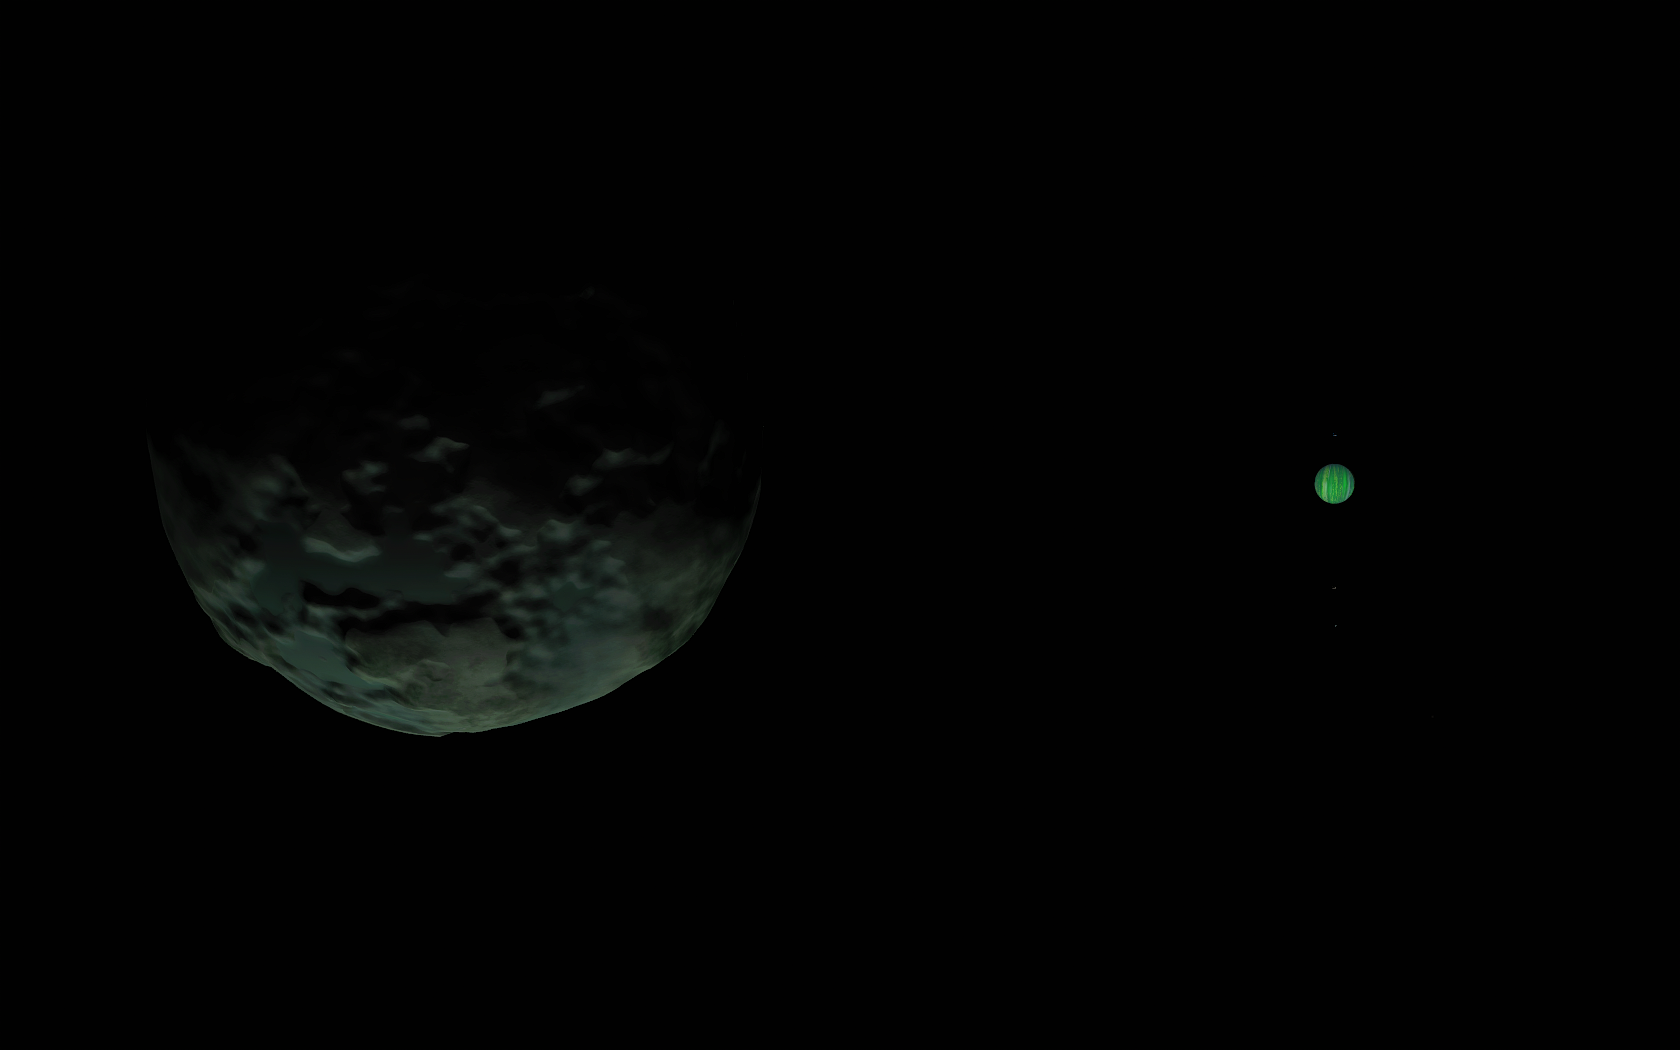 Also visible are the moons Vall, Tylo and Laythe